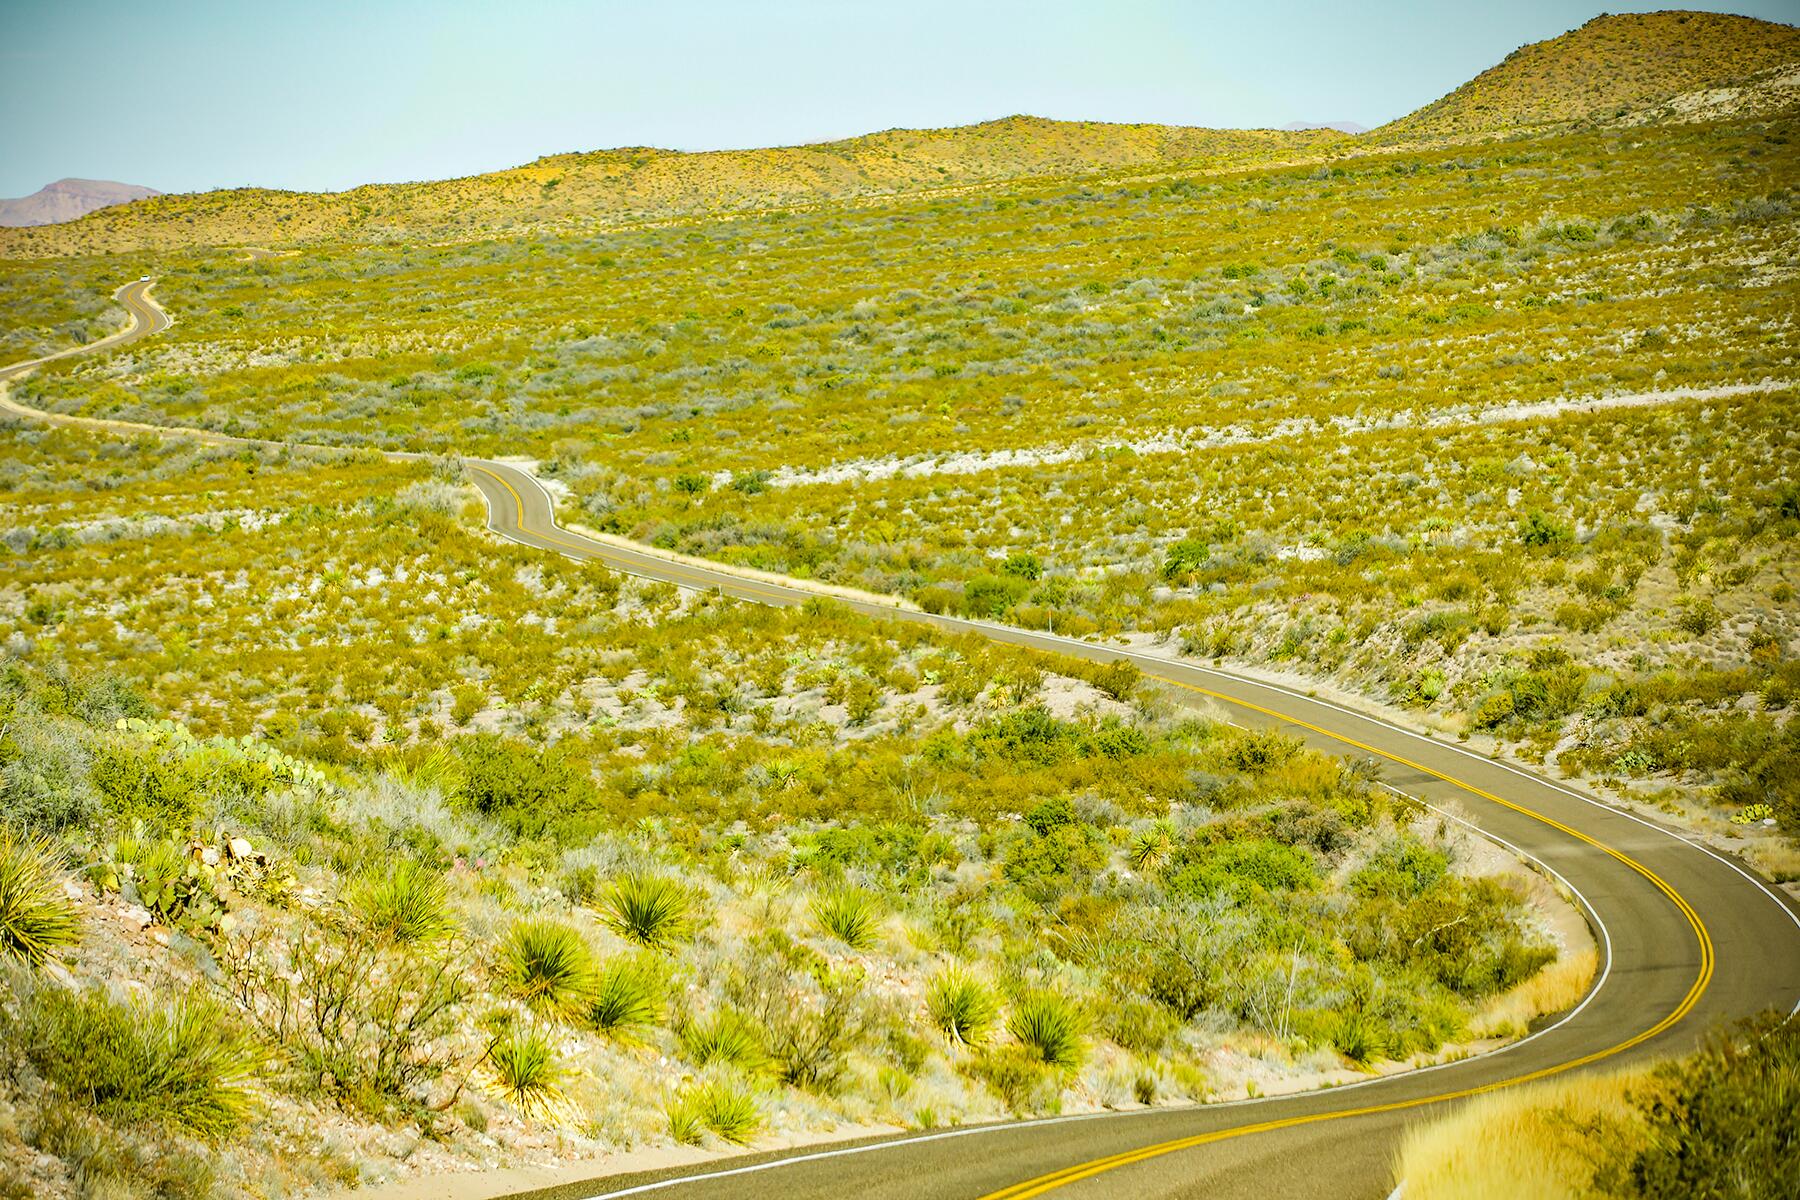 The scenic road in west Texas_Michelle Gross